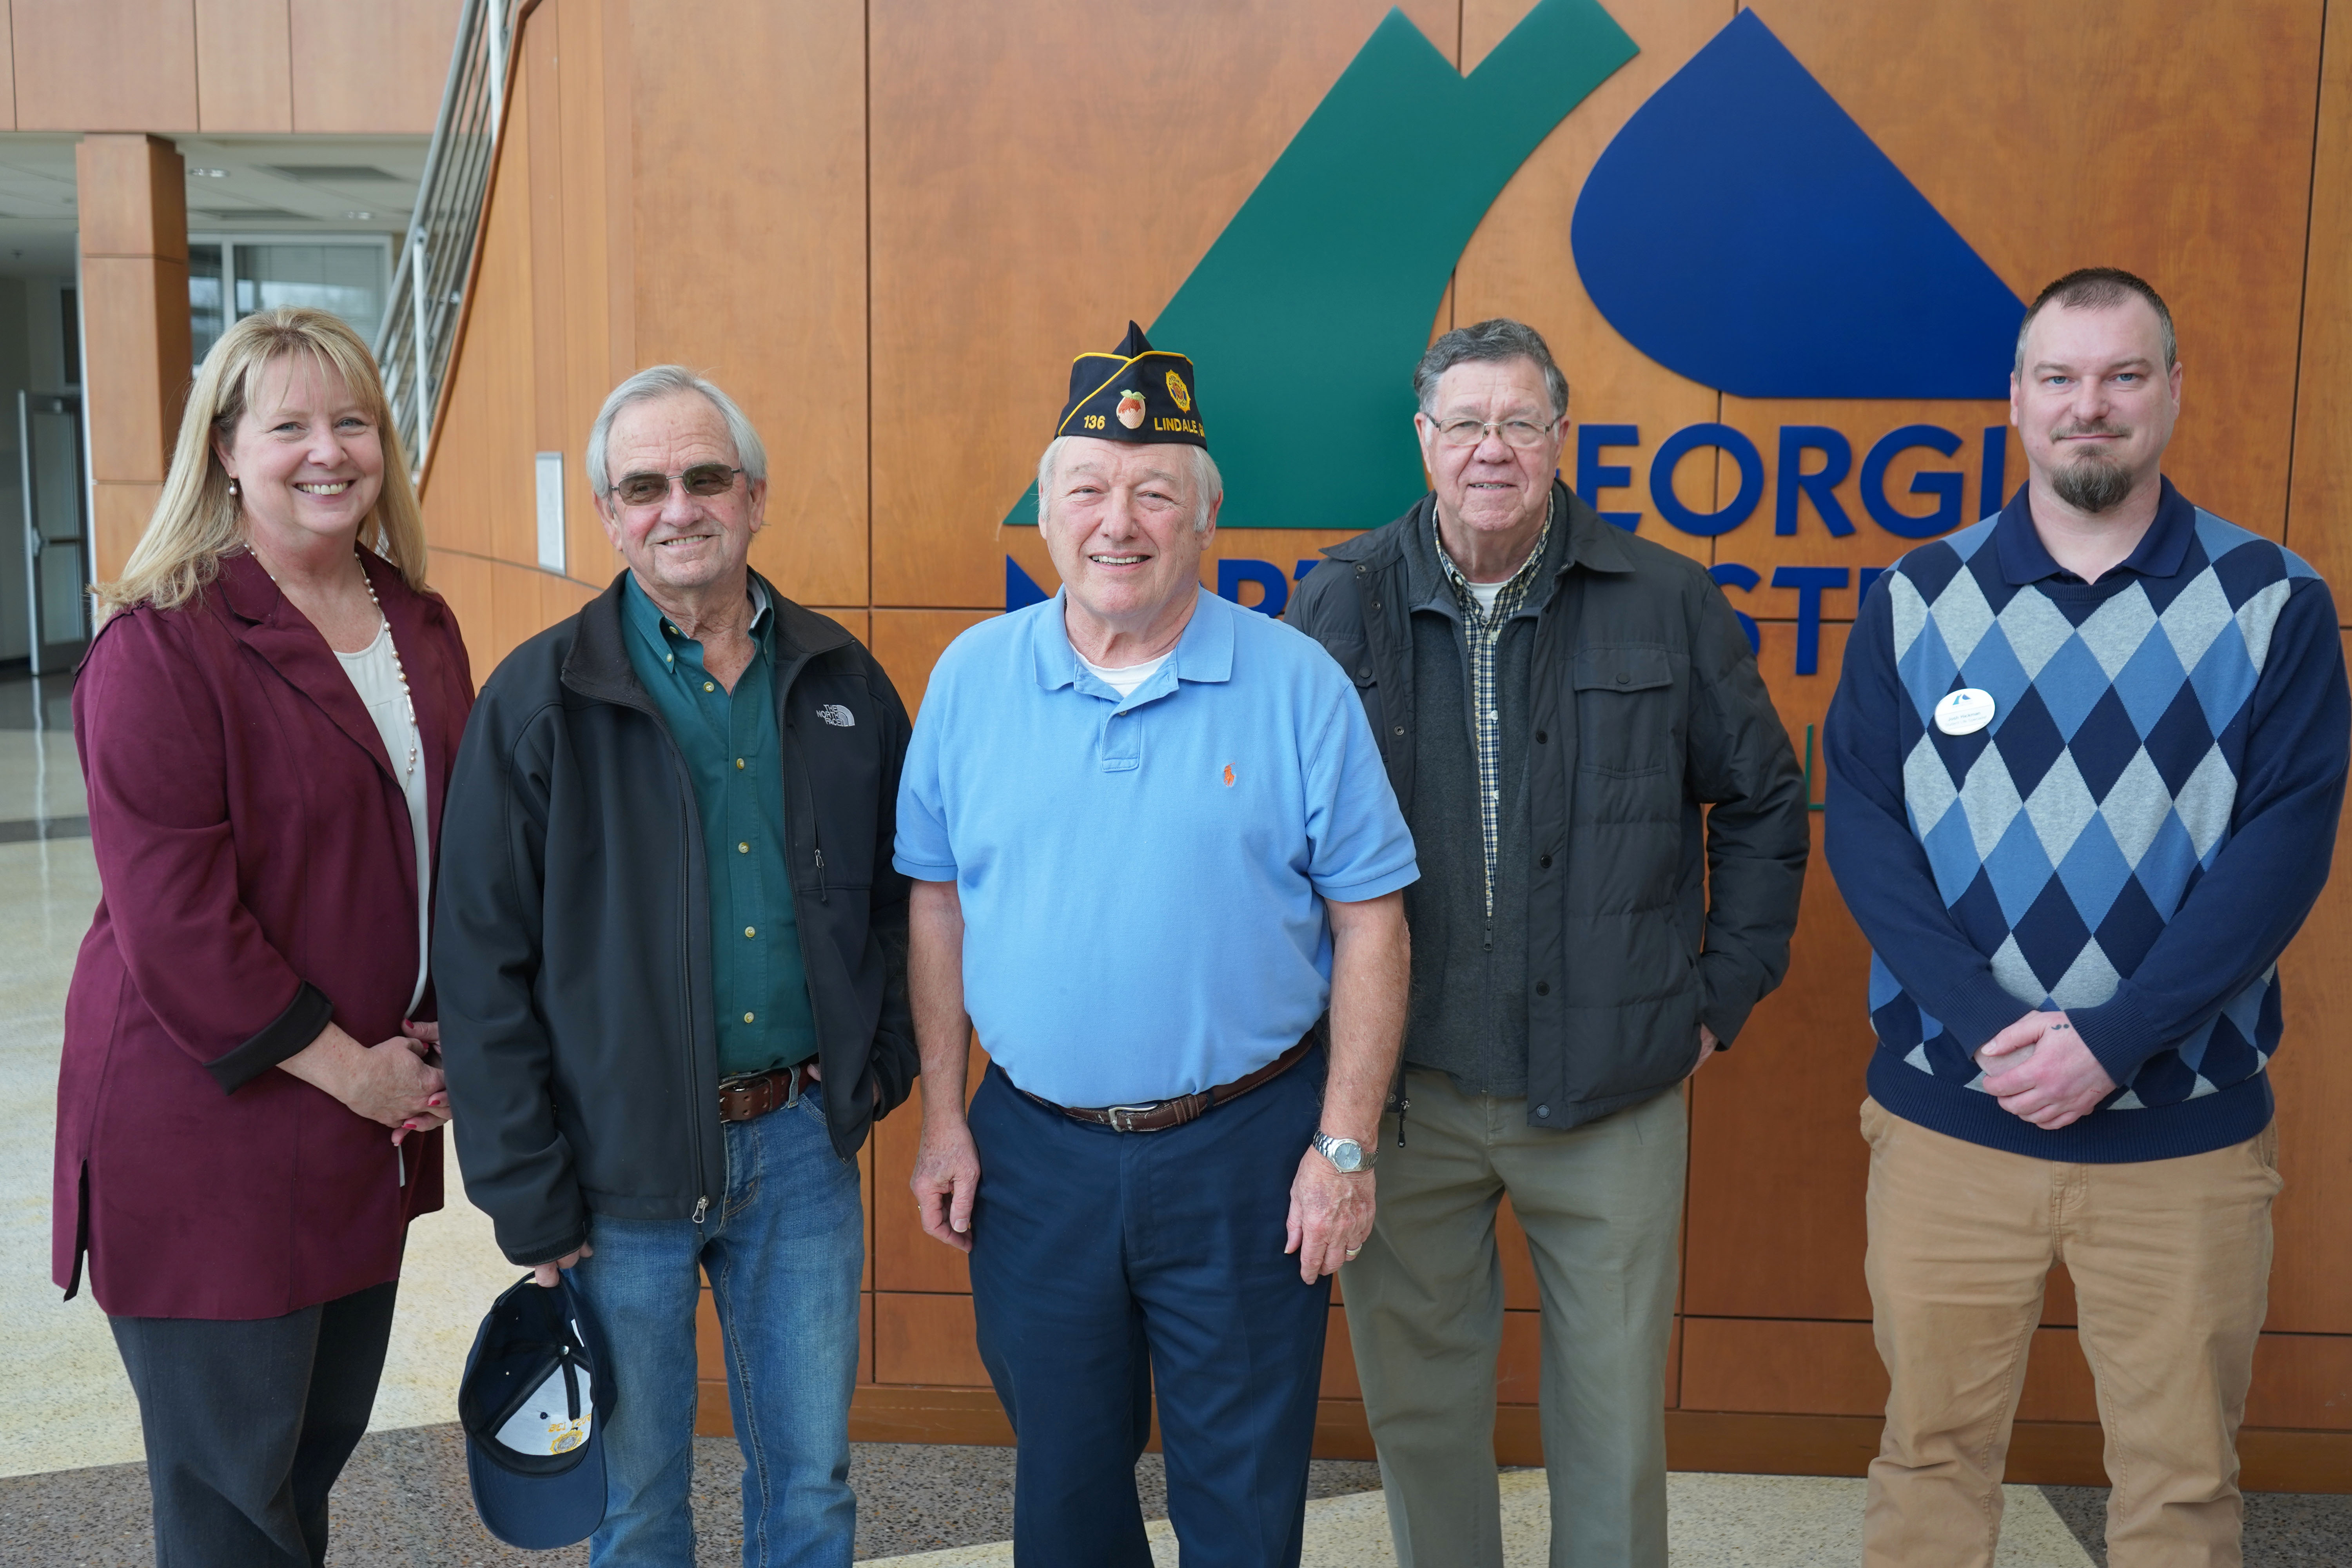 (From left) Dr. Heidi Popham, president of GNTC; David Cargill, former specialist fifth class in the U.S. Army; Ron Pajor, finance officer of Lindale Post 136 American Legion and former specialist fifth class in the U.S. Army; James Cox, former buck sergeant E5 in the U.S. Army and Josh Hickman, Student Life specialist at GNTC and former sergeant in the U.S. Air Force. Cargill is vice commander of Lindale Post 136, and Cox is past commander.